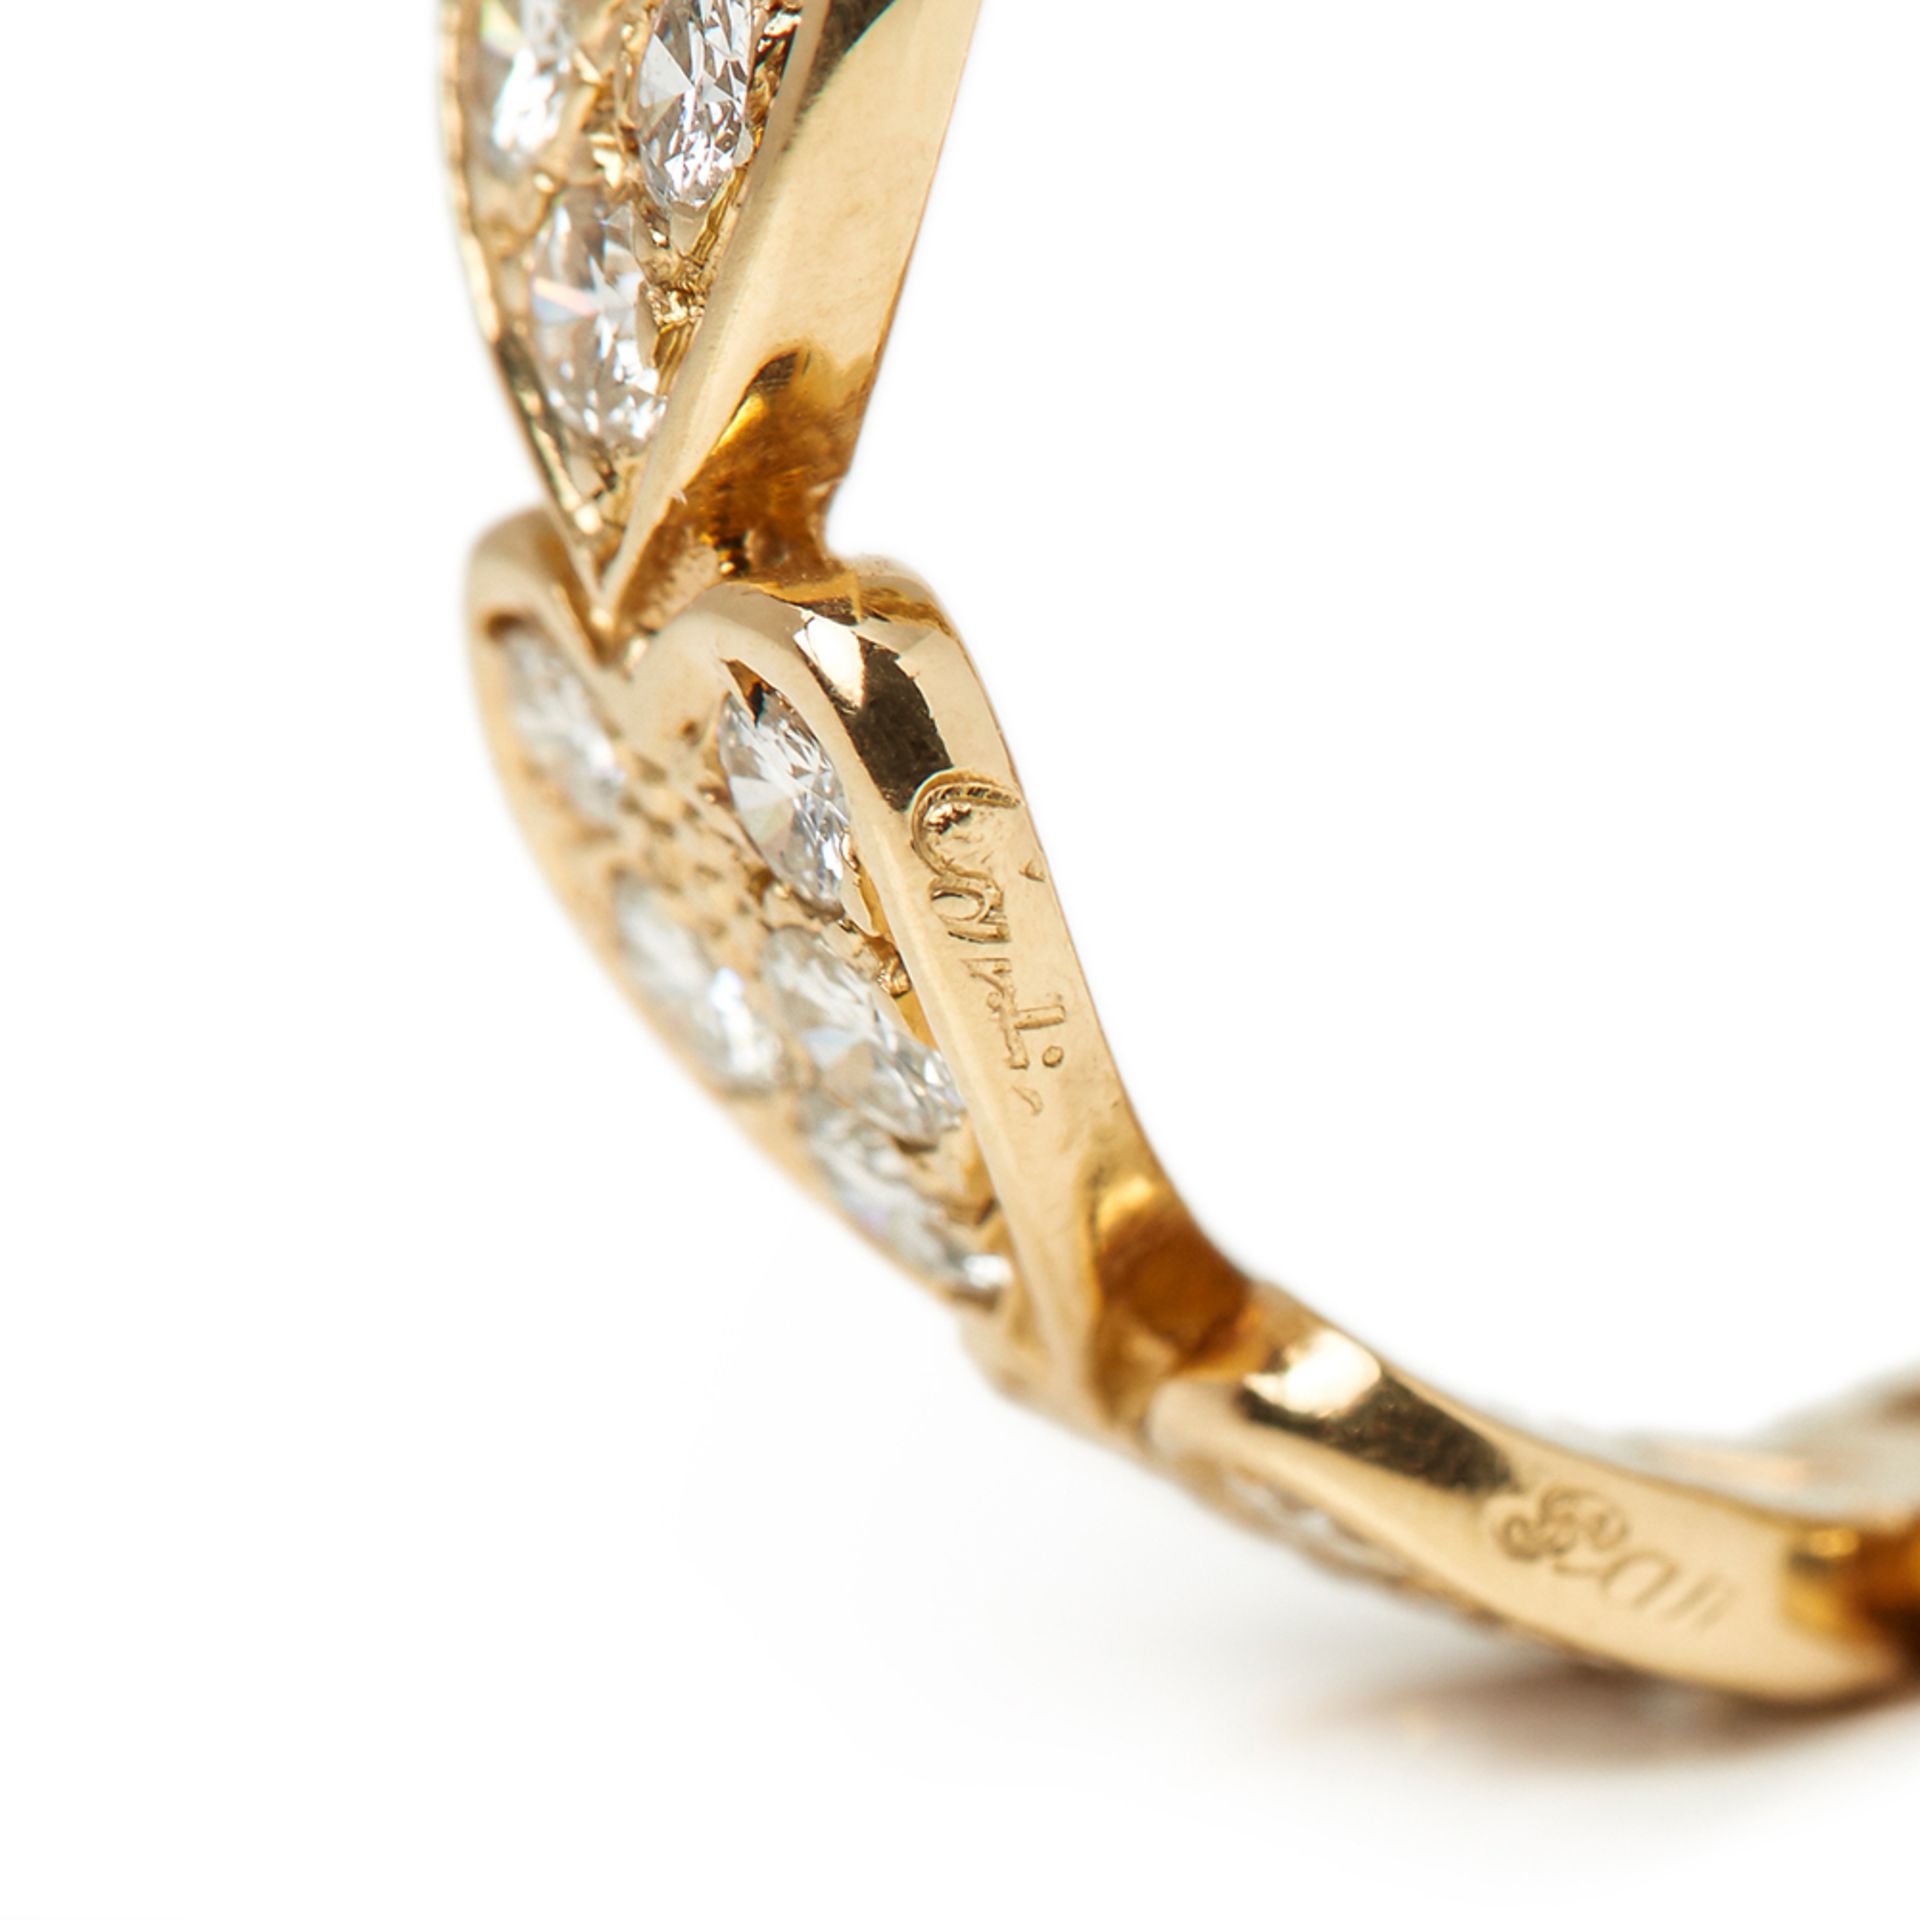 Cartier 18k Yellow Gold Diamond Heart Ring - Image 9 of 23